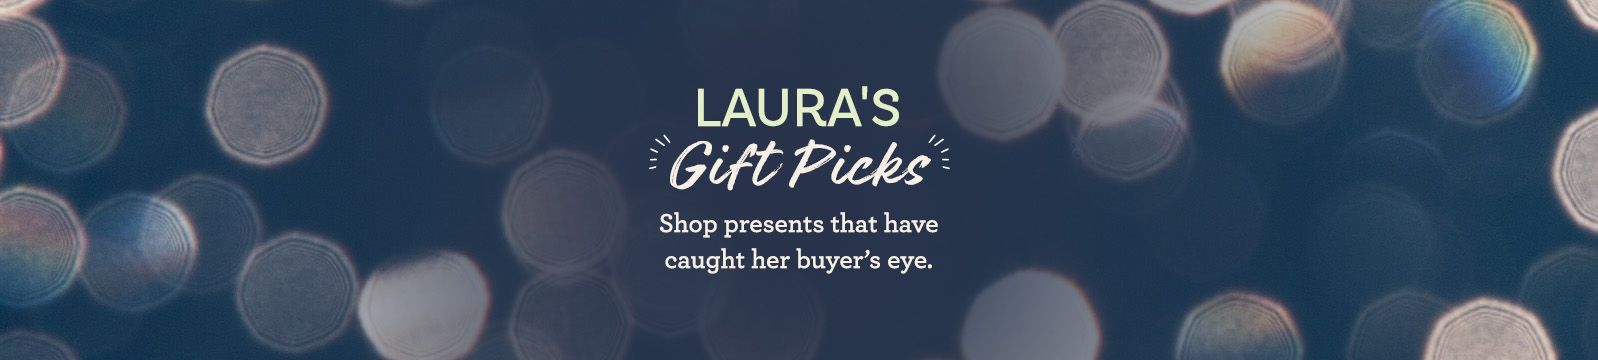 Laura's Gift Picks Shop presents that have caught her buyer's eye.